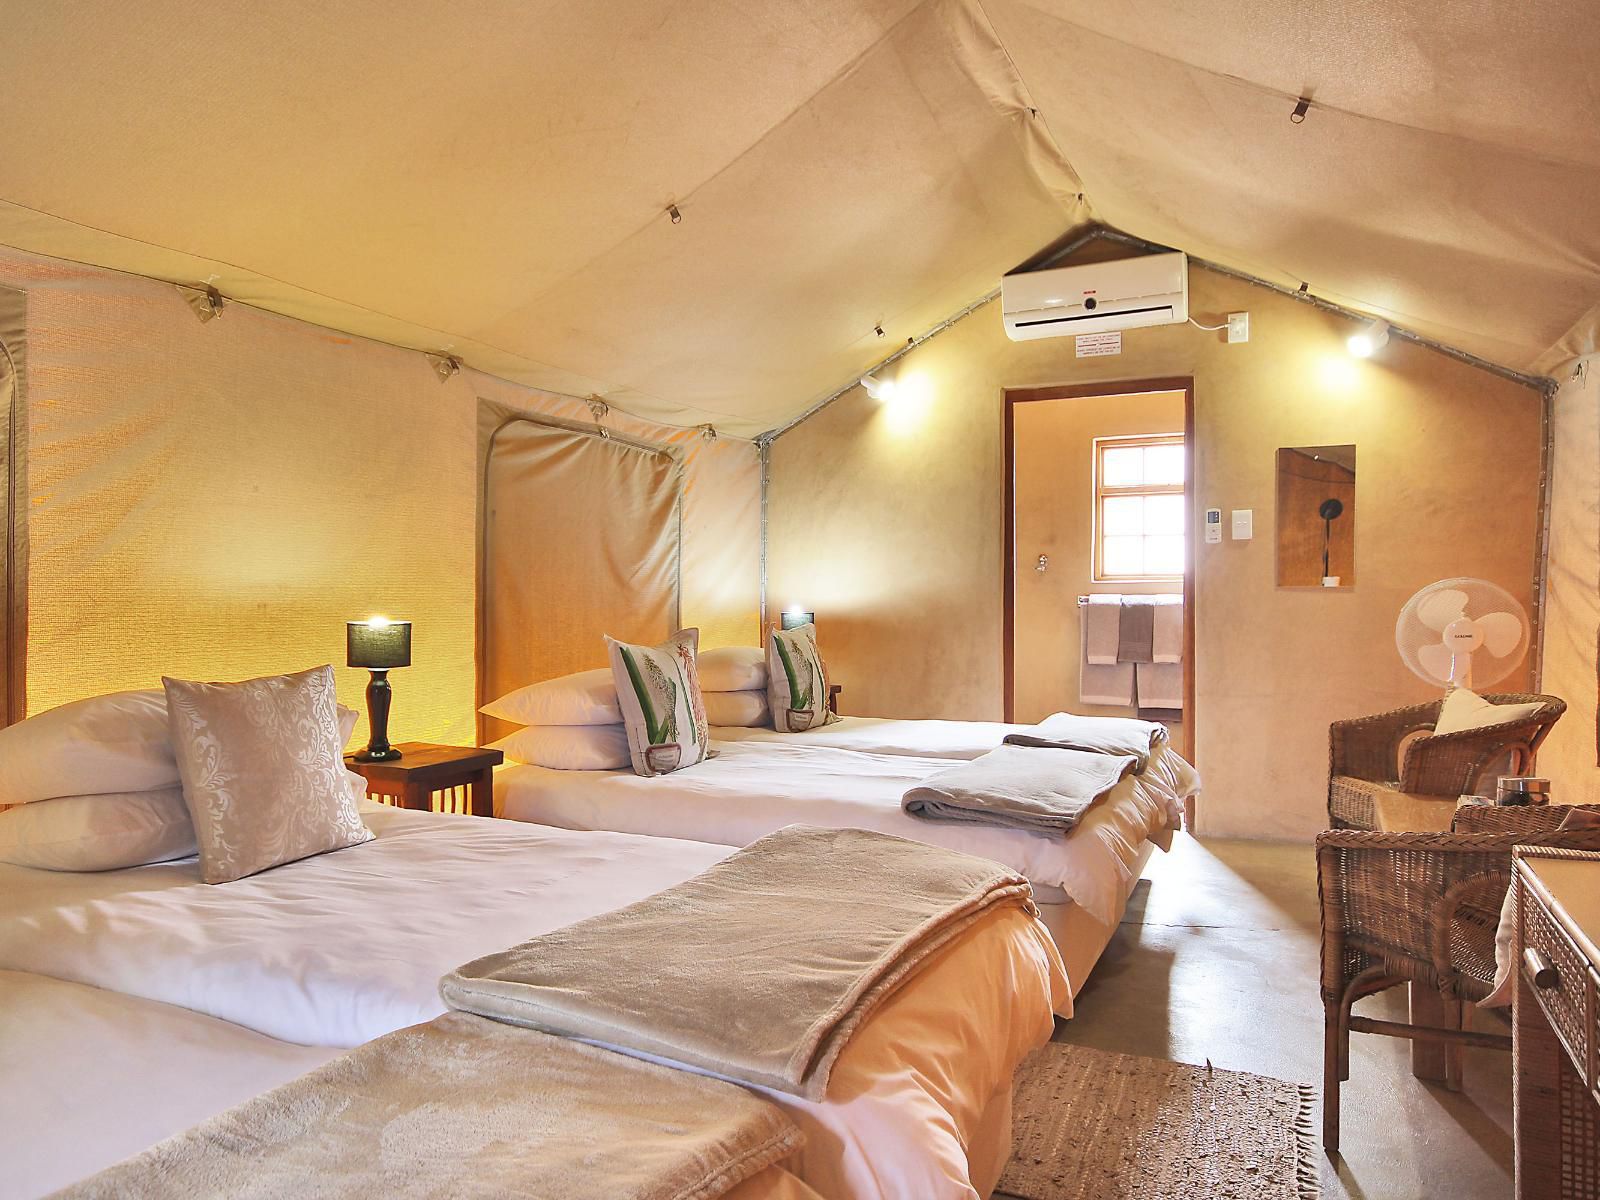 Frontier River Resort Vioolsdrift Northern Cape South Africa Tent, Architecture, Bedroom